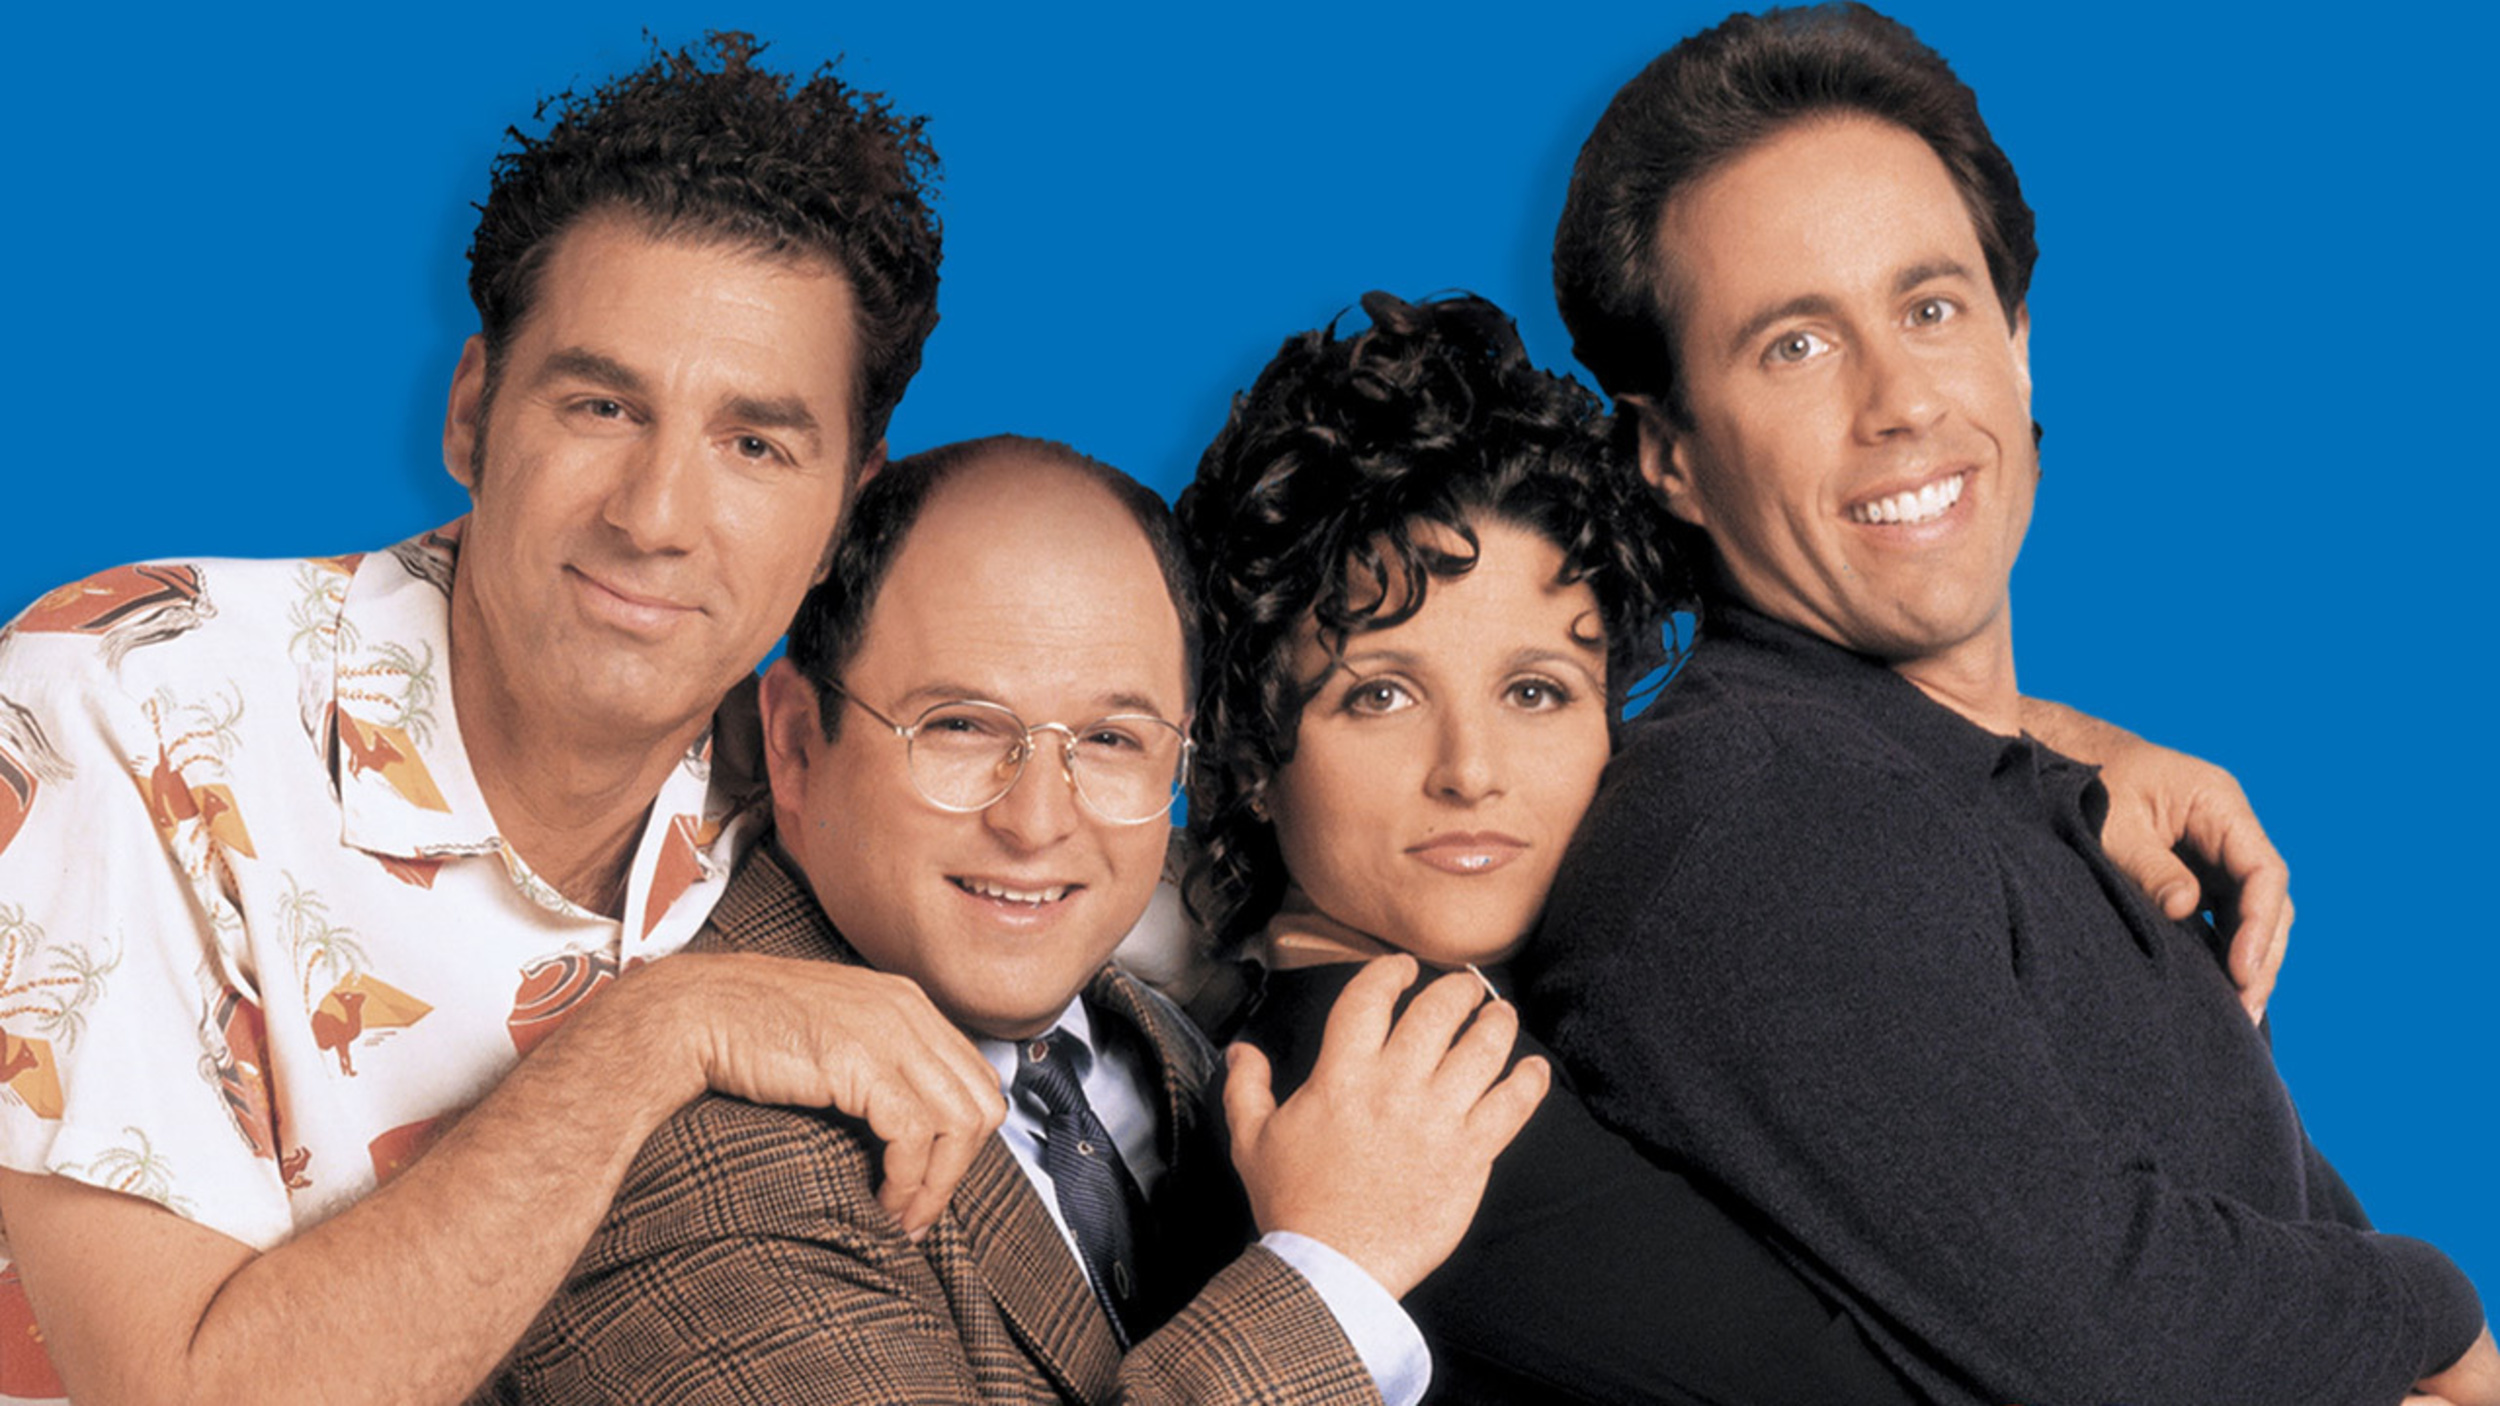 <p>Jerry, Elaine, George and Kramer end up in prison for being the worst. Well, not exactly that reason, but pretty much. And you know what? They deserved it. Sorry, not sorry.</p><p><a href='https://www.msn.com/en-us/community/channel/vid-cj9pqbr0vn9in2b6ddcd8sfgpfq6x6utp44fssrv6mc2gtybw0us'>Did you enjoy this slideshow? Follow us on MSN to see more of our exclusive entertainment content.</a></p>